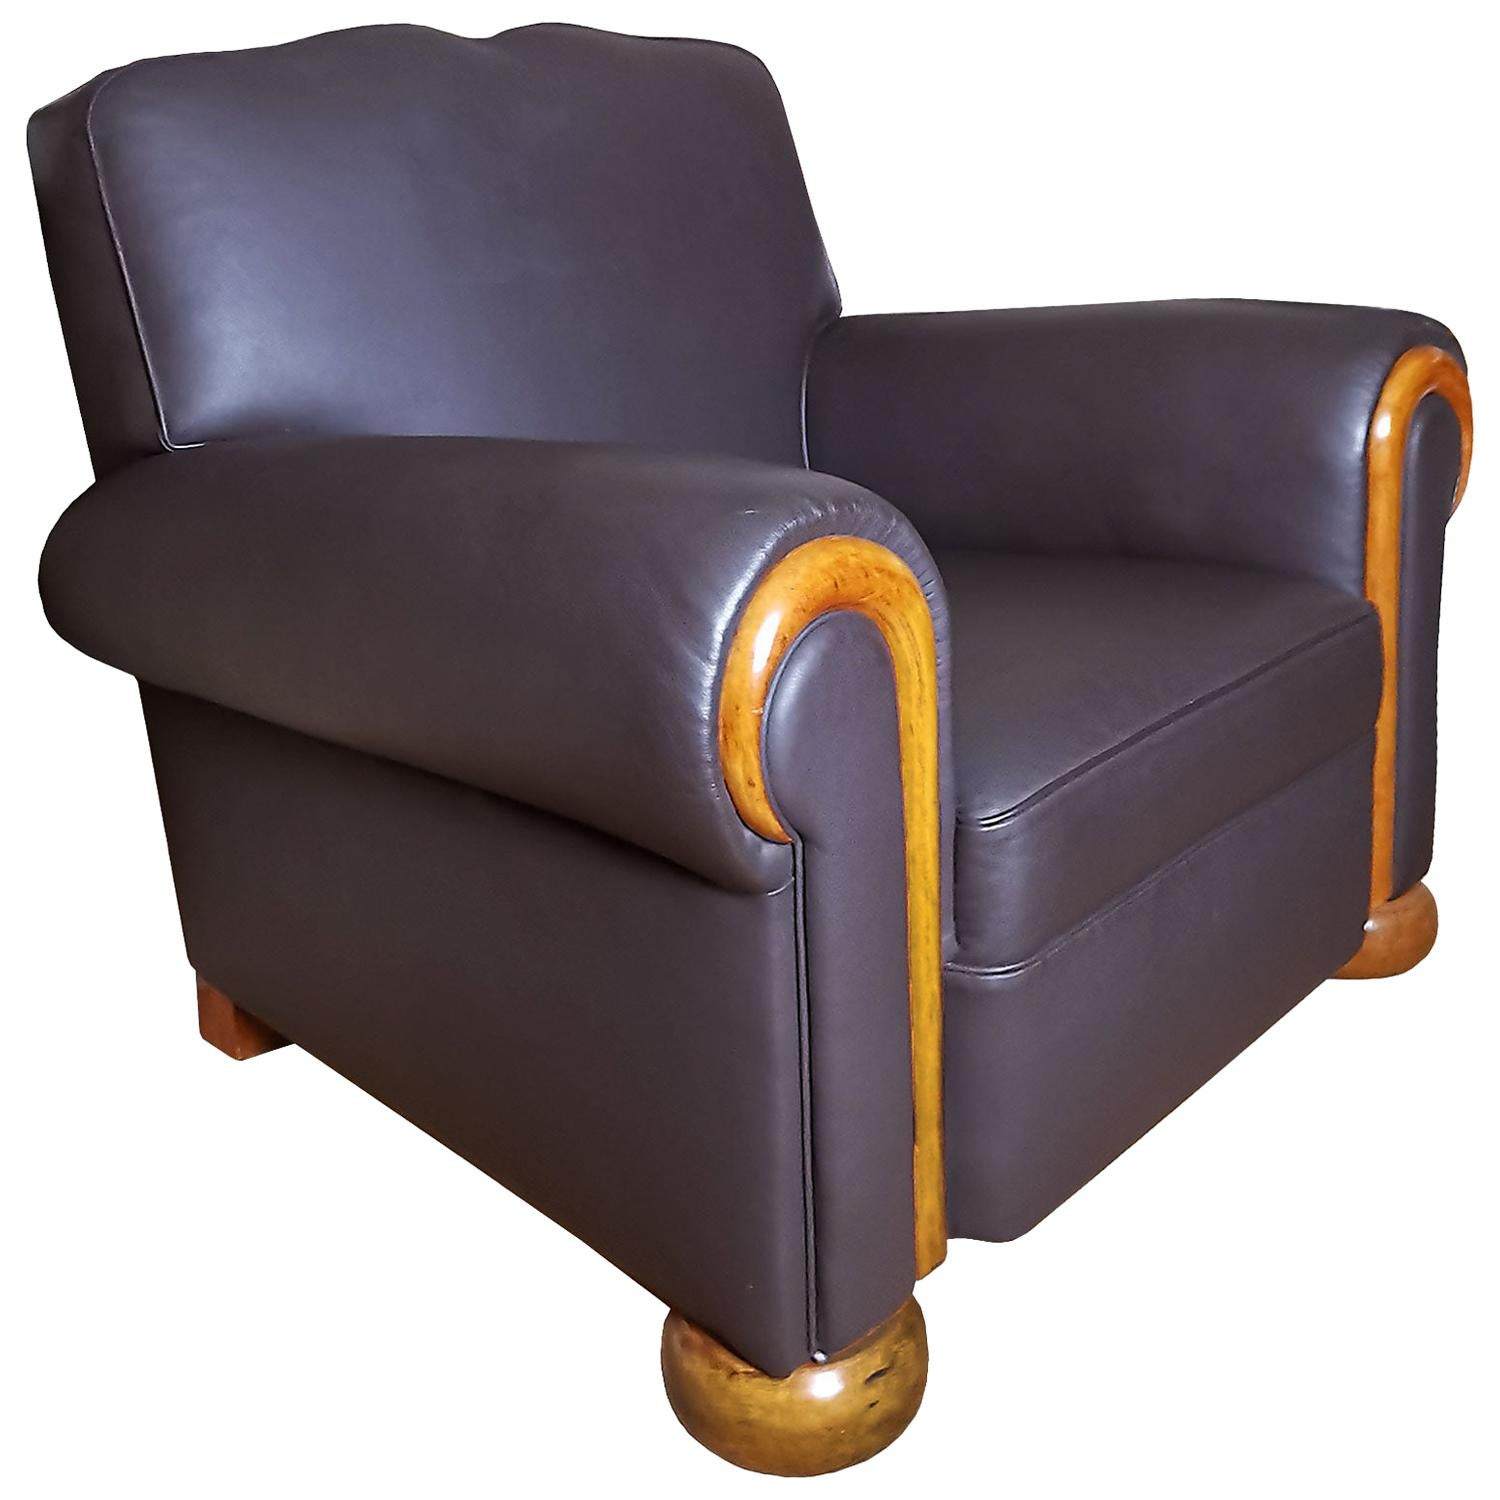 Big Mid-Century Modern Club Armchair, Wood and Chocolate Leather - Belgium For Sale